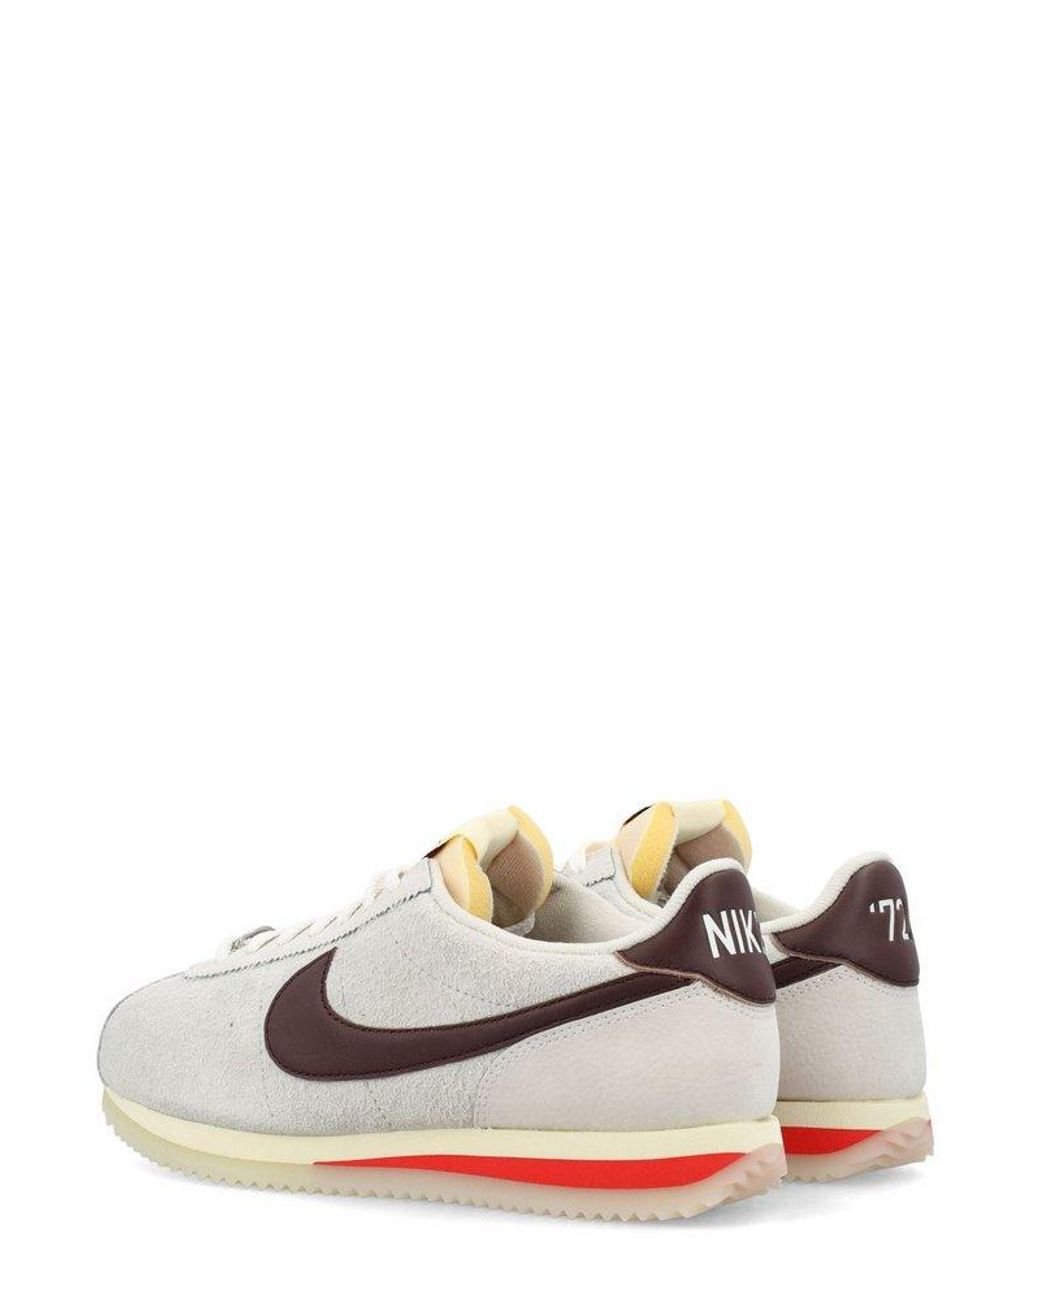 Nike Cortez 23 Lace-up Sneakers in White | Lyst